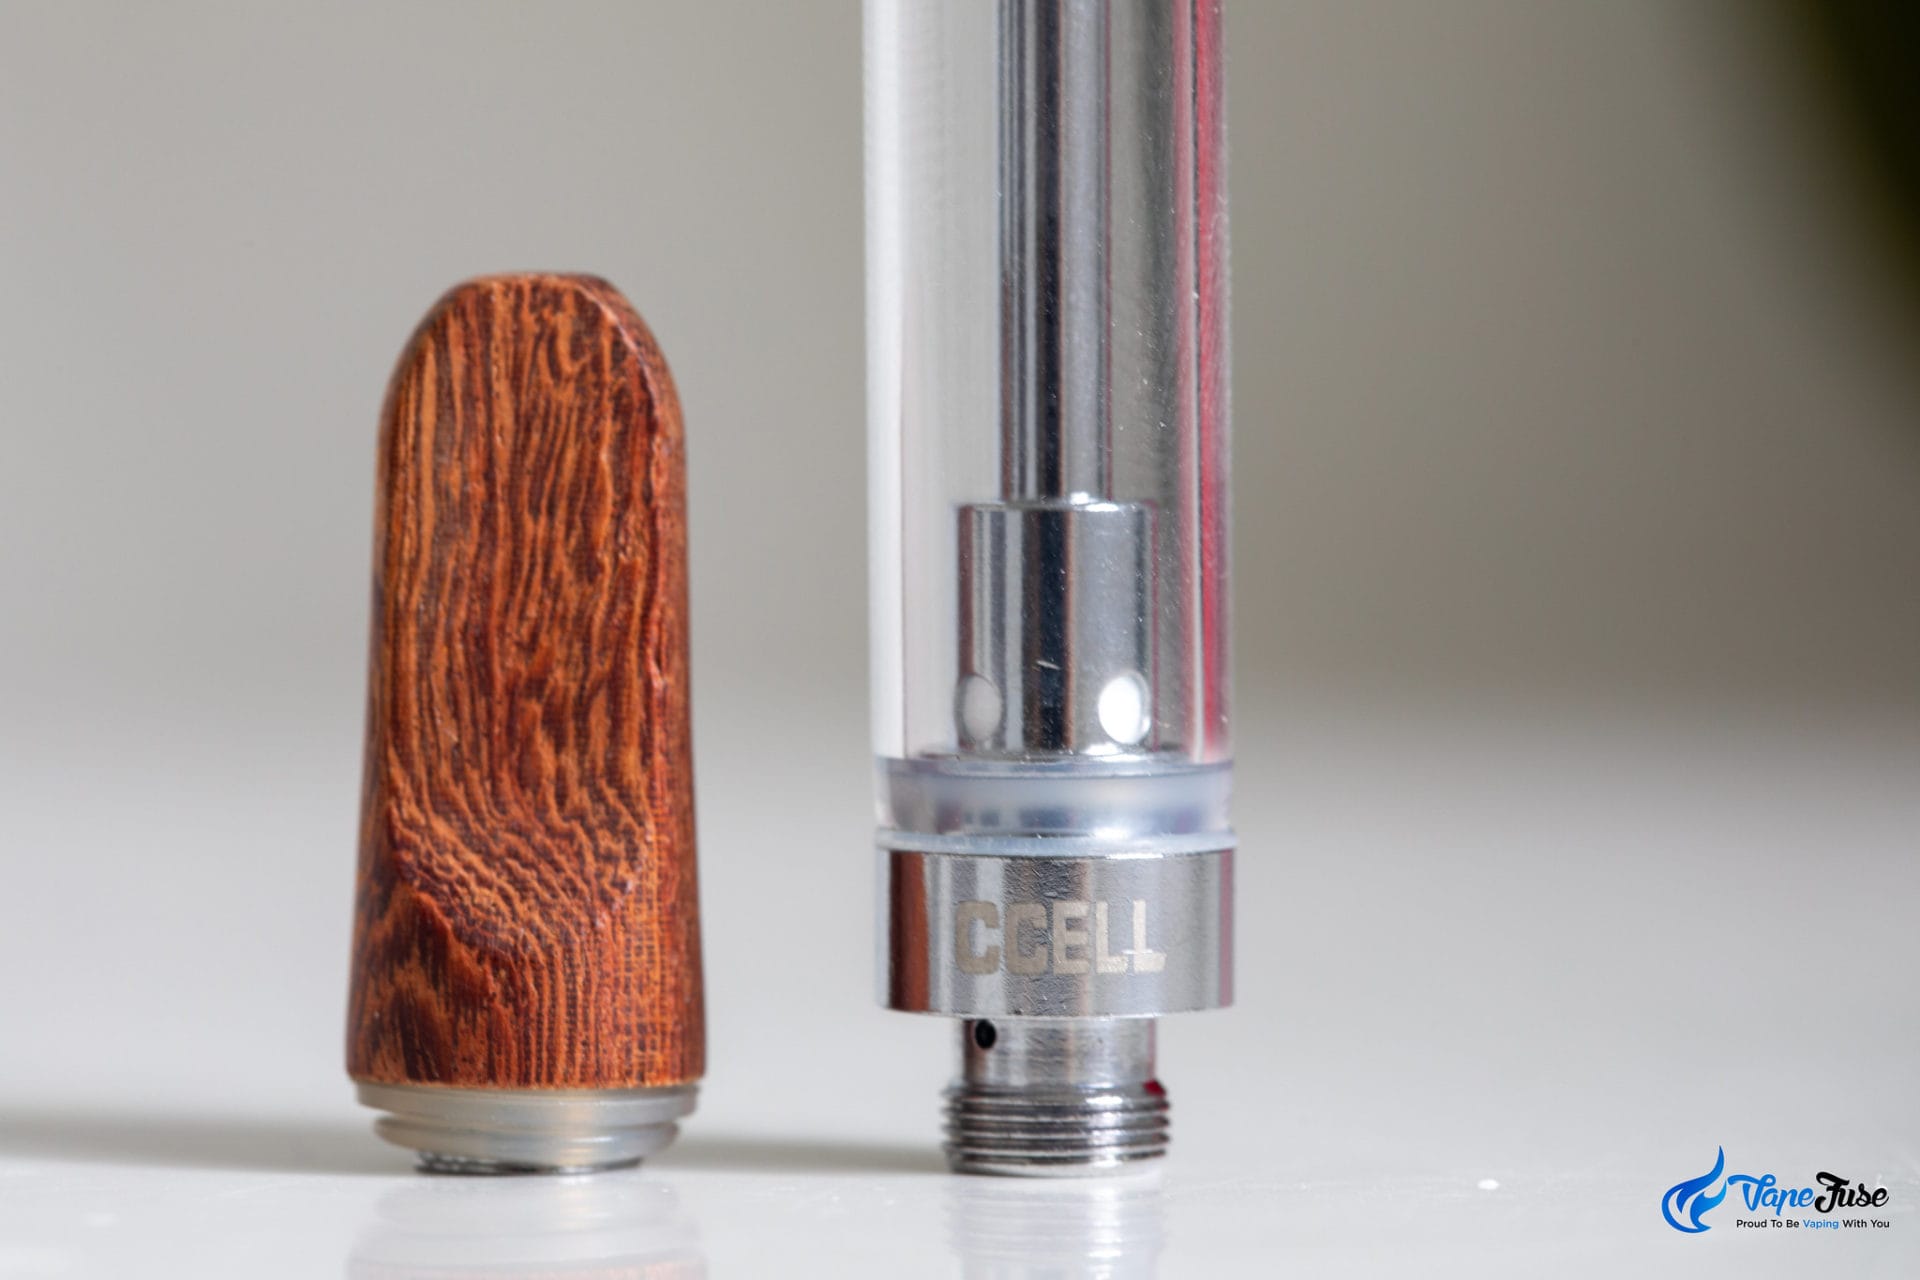 CCell Th2 Oil Cartridge